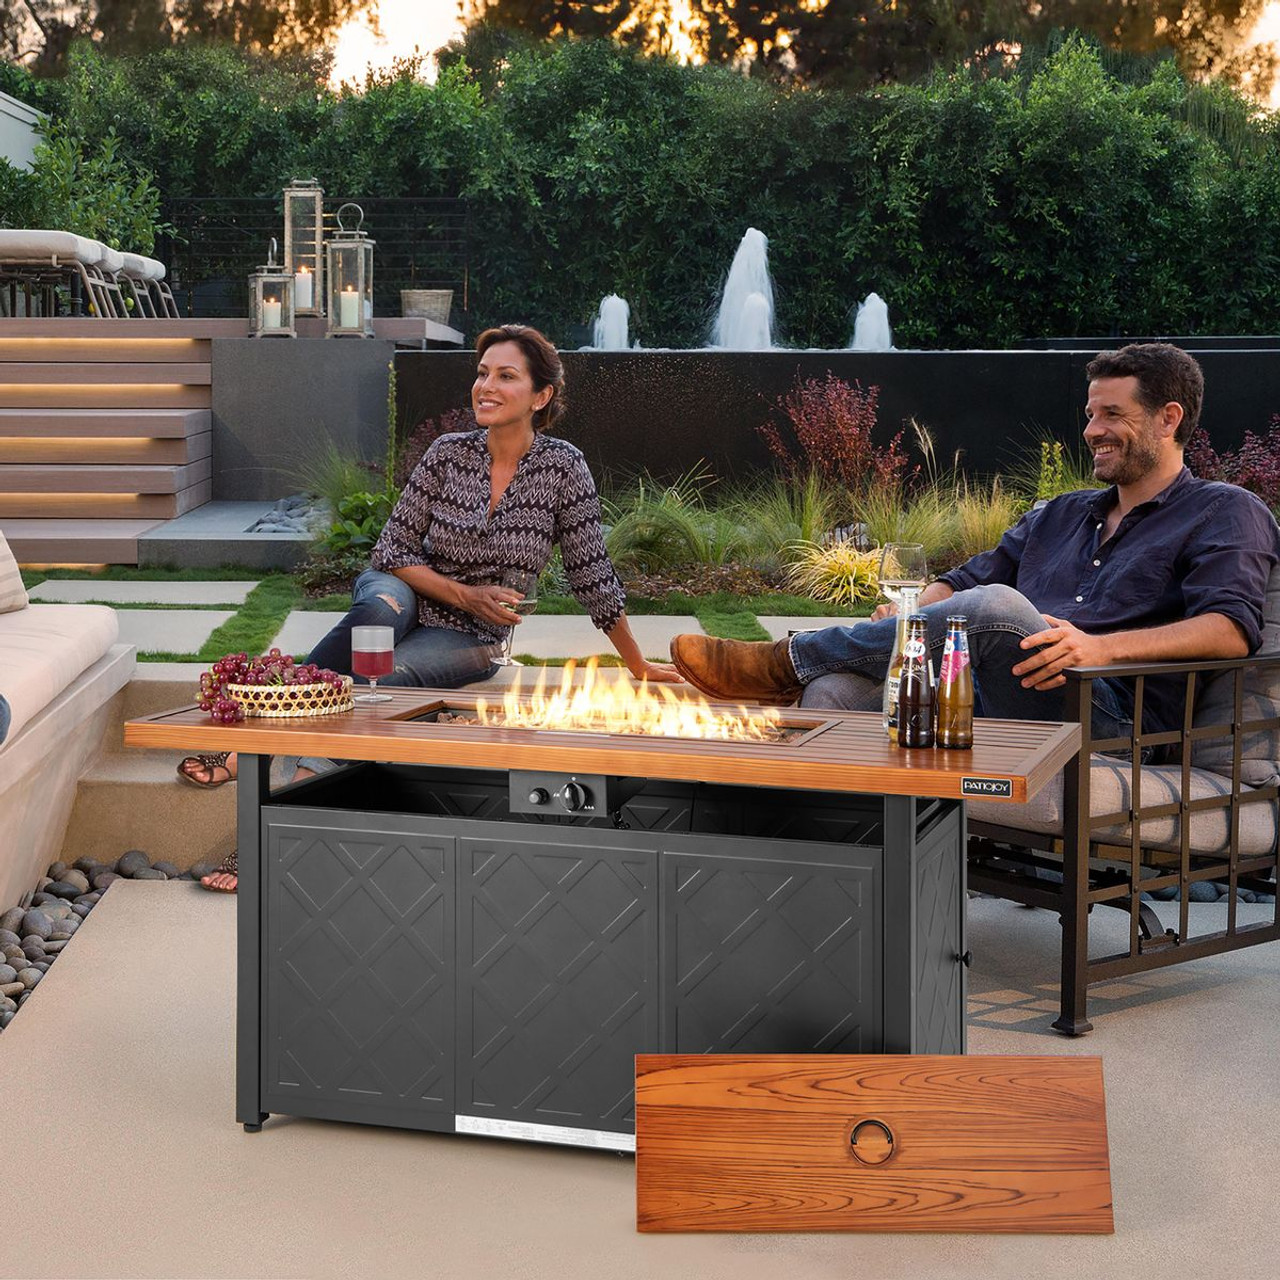 57-Inch 50,000BTU Rectangular Propane Outdoor Fire Pit Table product image